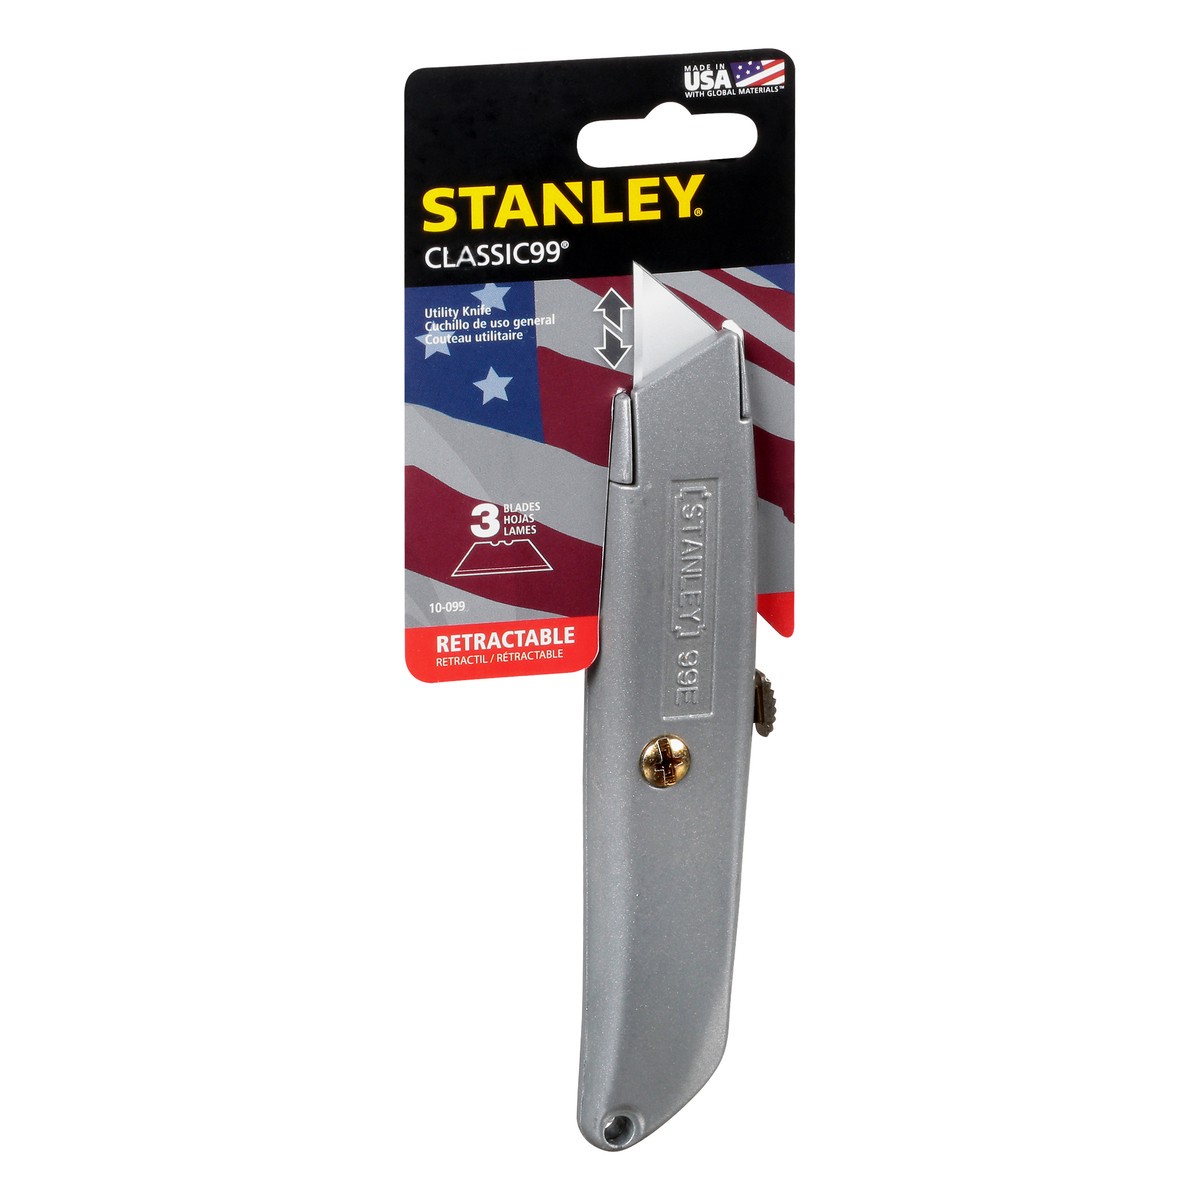 slide 6 of 11, STANLEY Classic99 Retractable Utility Knife 1 ea, 1 ct